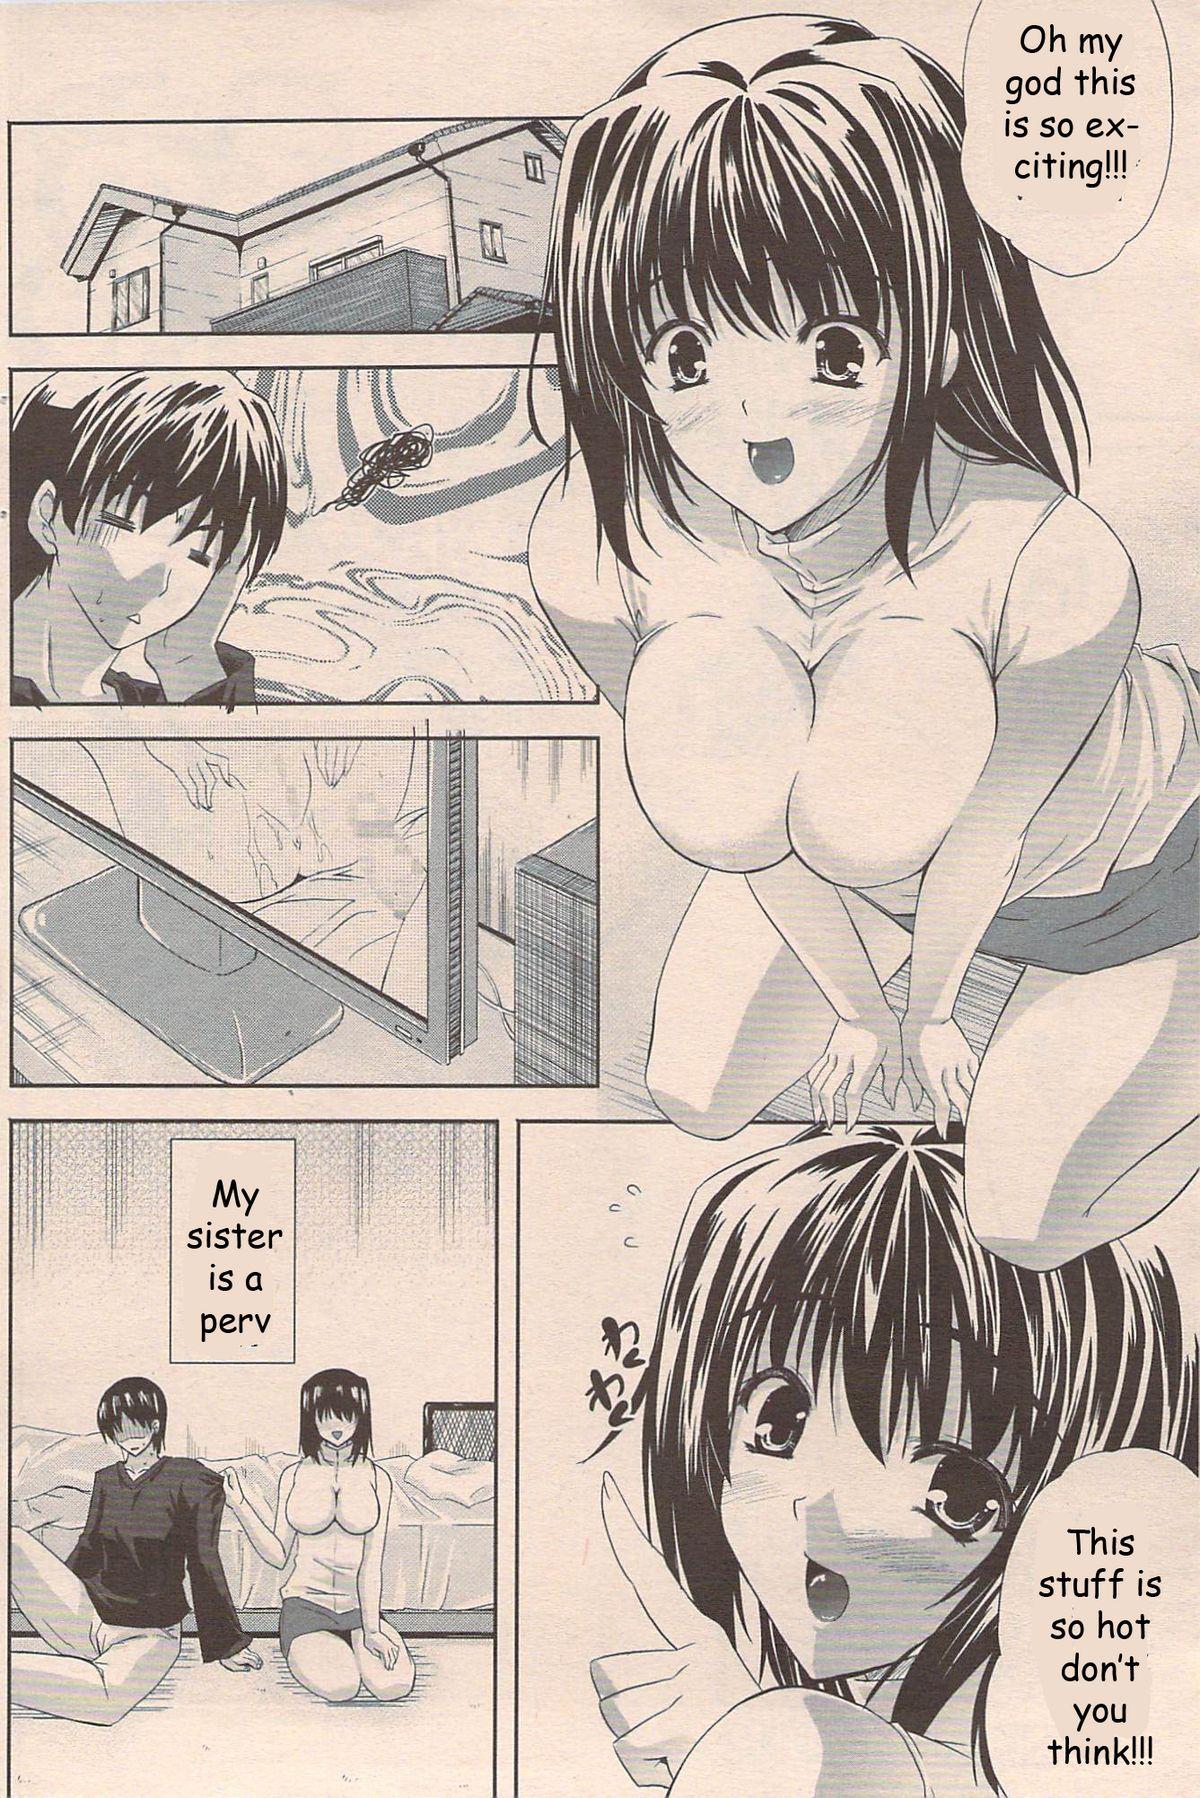 Perverted Sister Page 2 Of 16 hentai haven, Perverted Sister Page 2 Of 16 u...